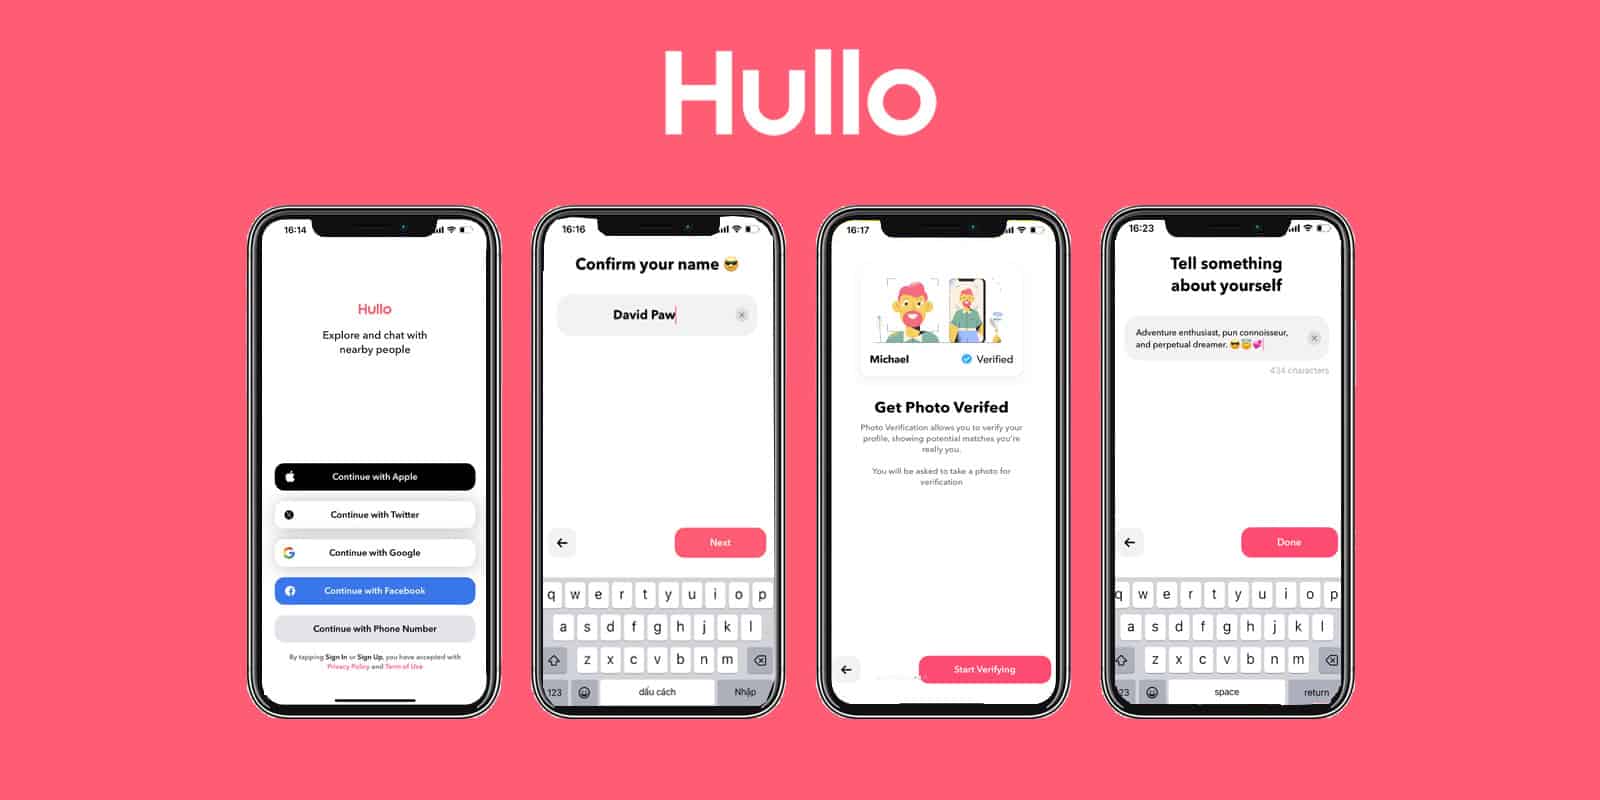 steps to register for hullo application